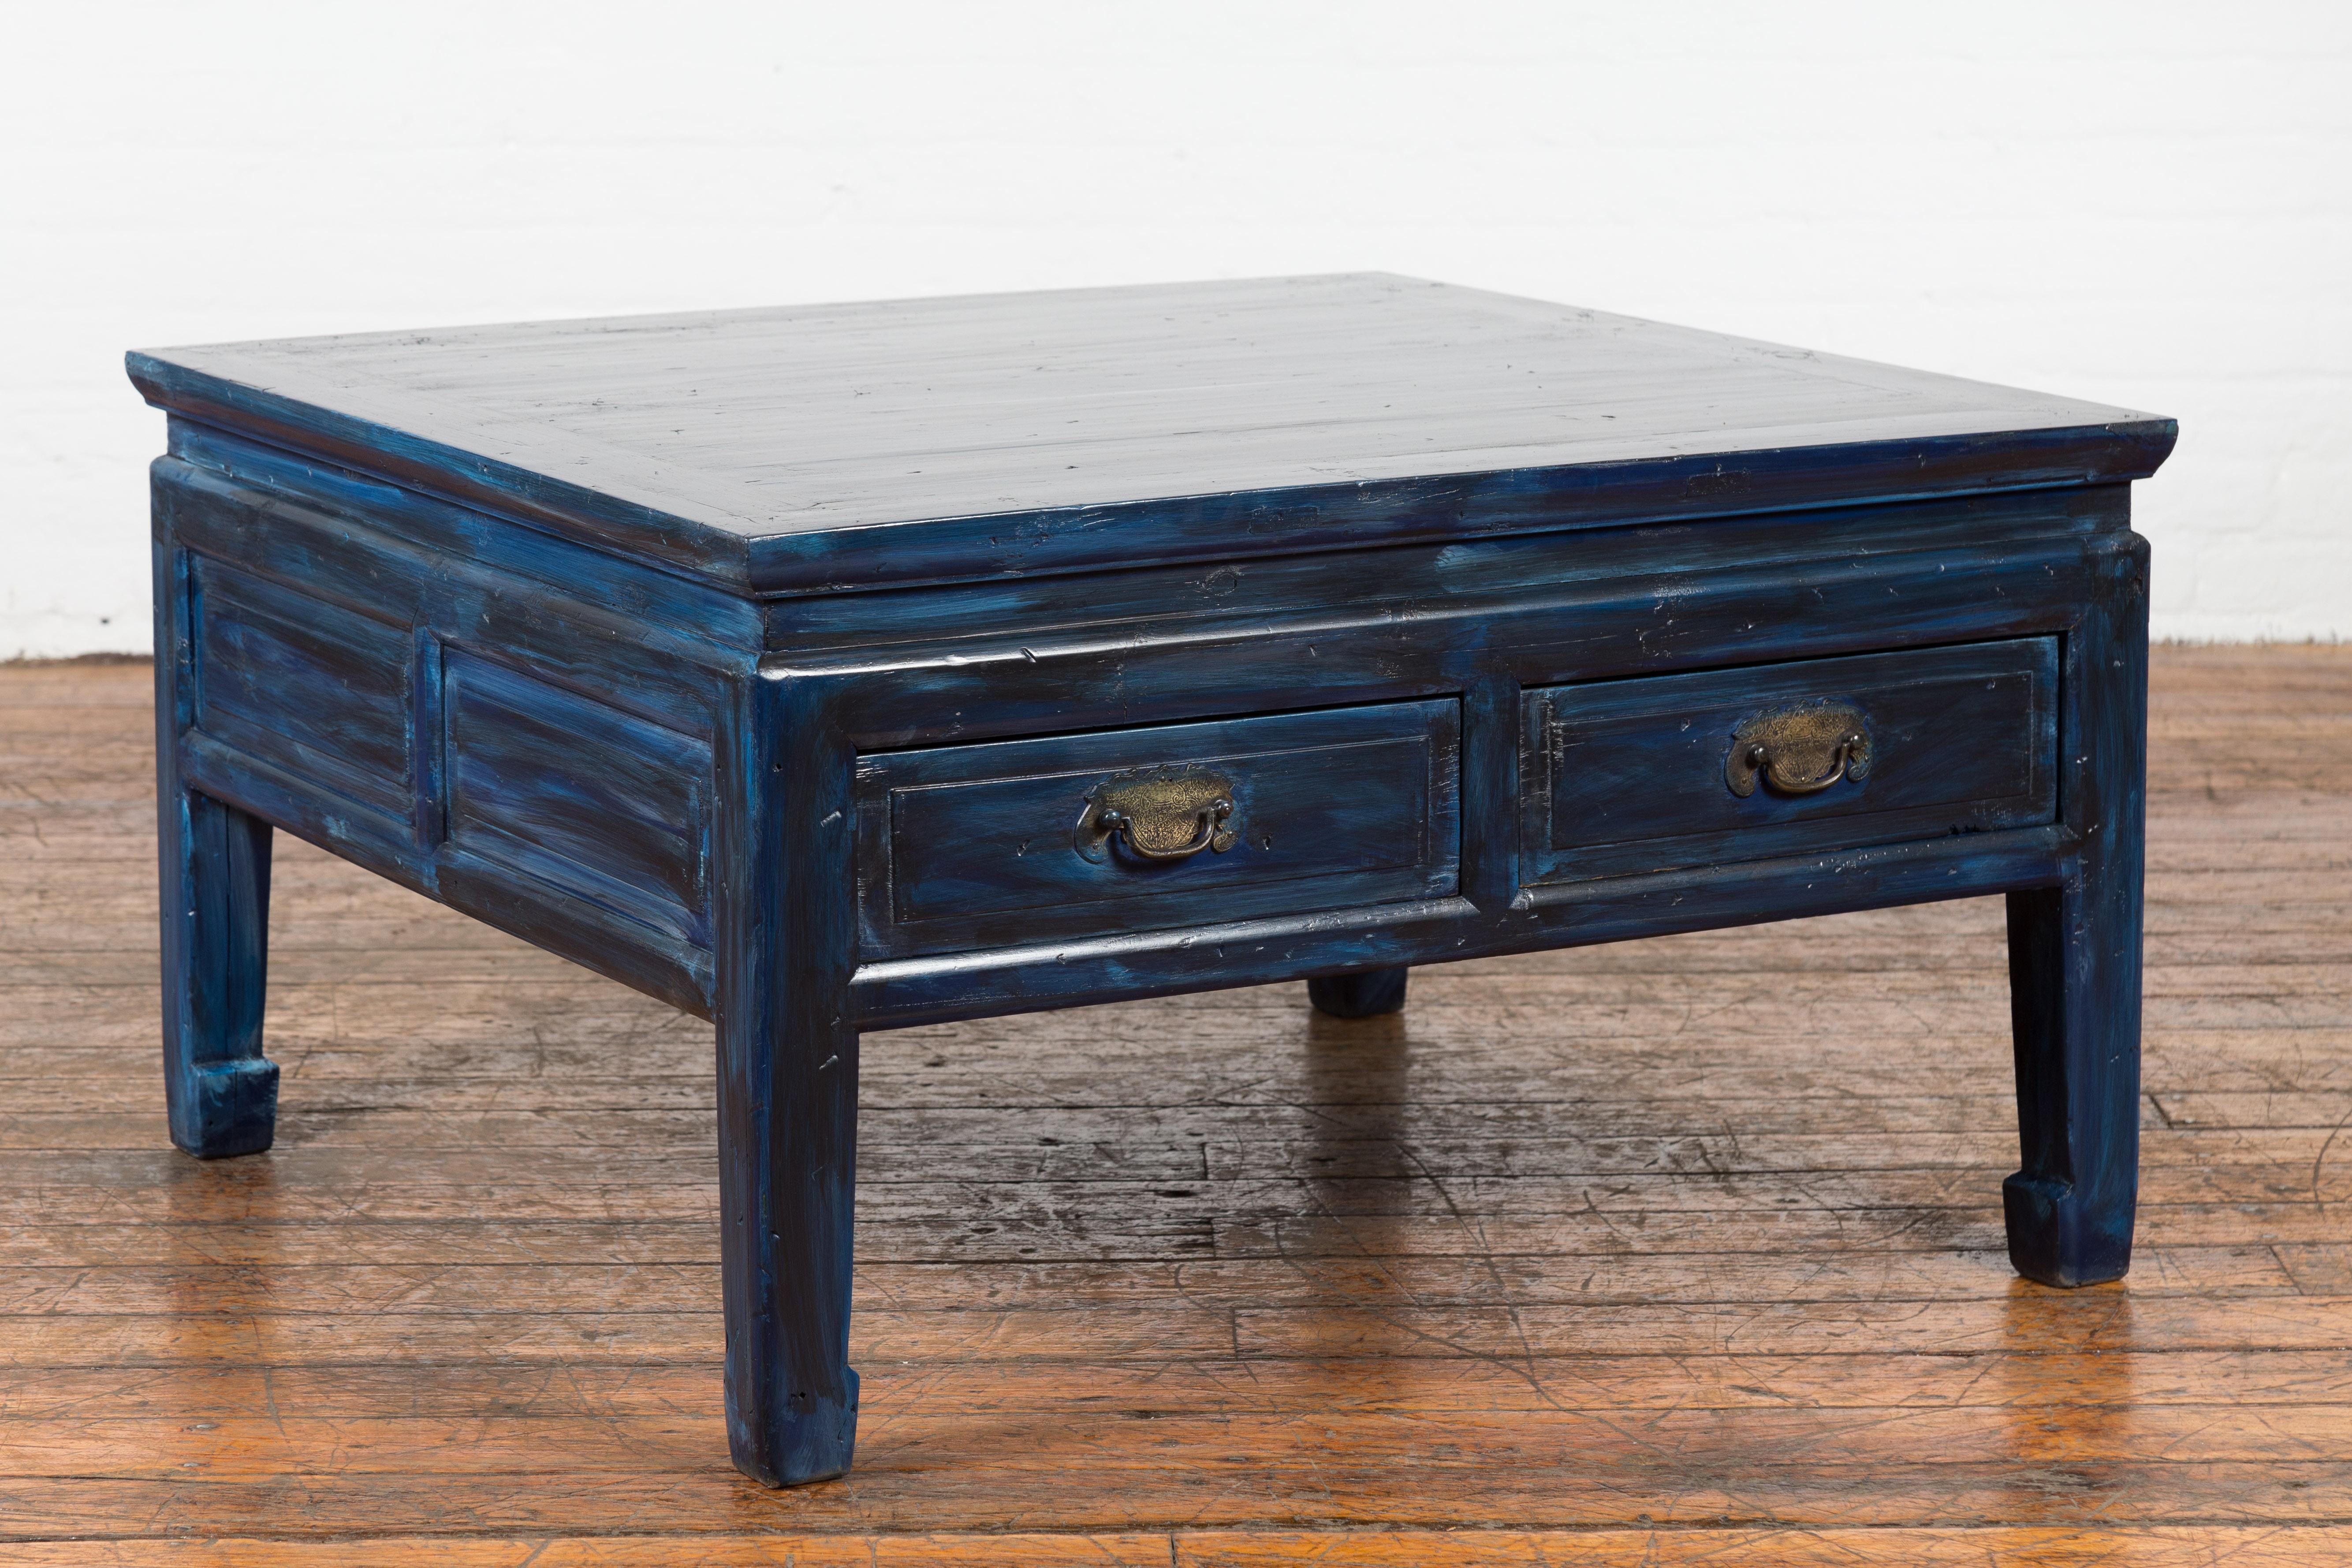 A vintage Chinese coffee table from the mid 20th century, re-lacquered with a new custom blue finish, two drawers, ornate brass hardware and horse hoof feet. This vintage Chinese coffee table from the mid 20th century is a stunning blend of